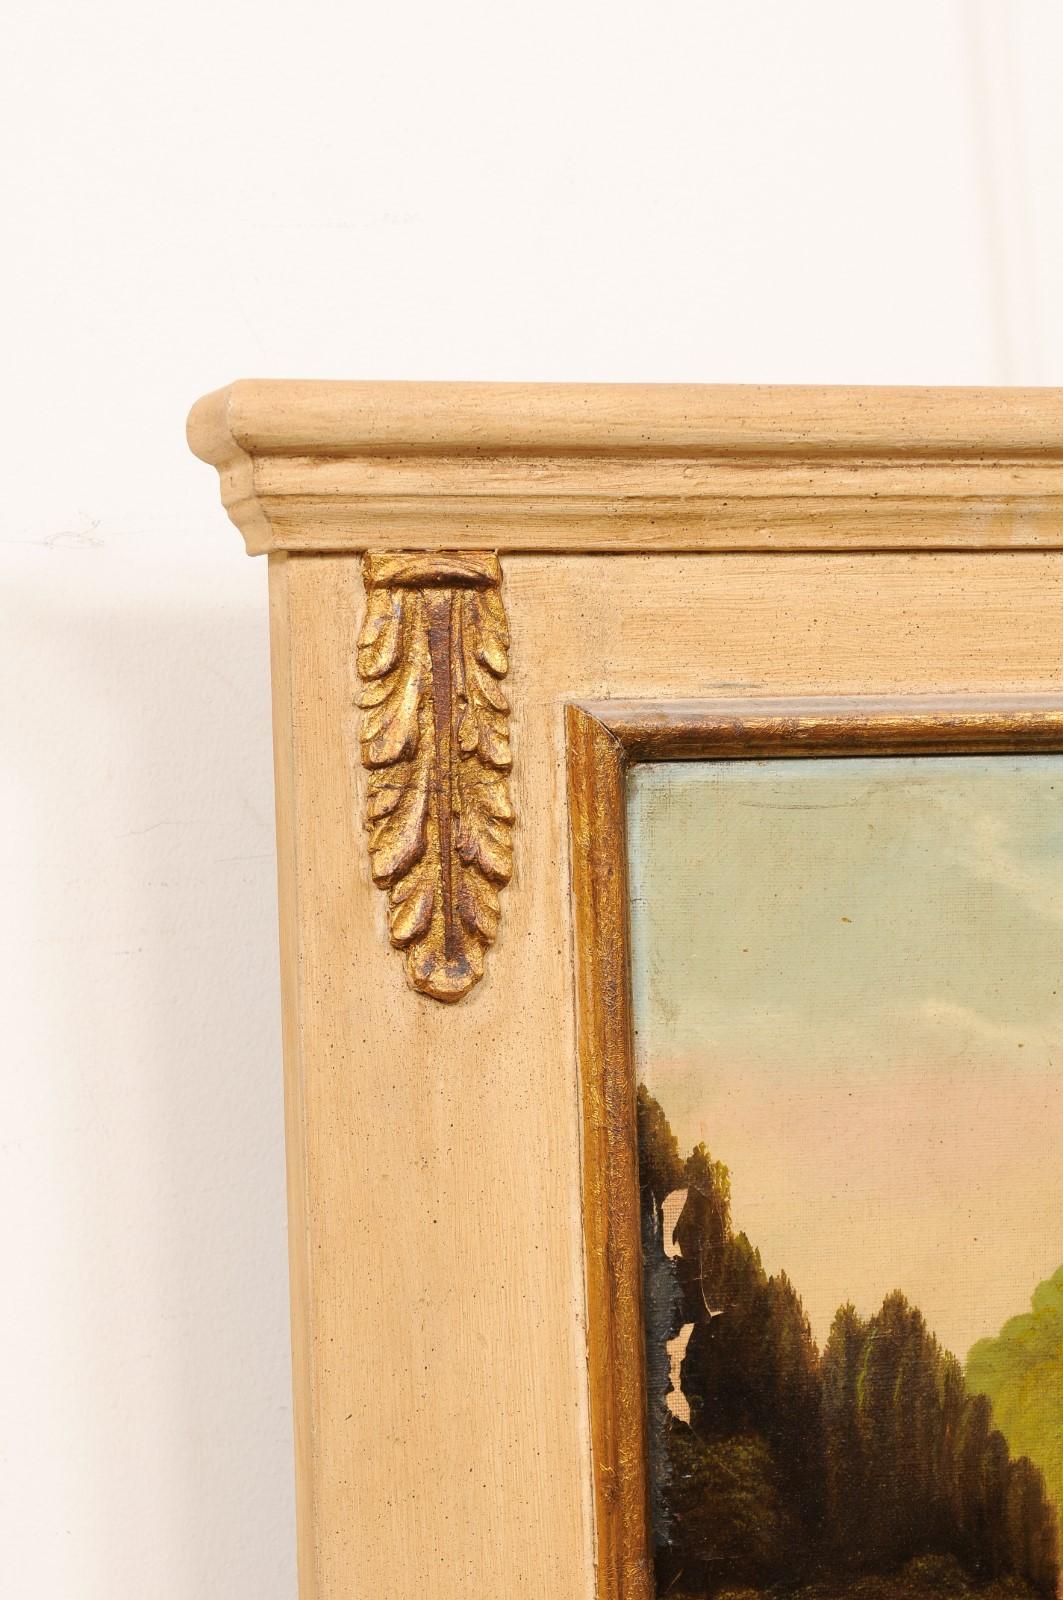 Small Trumeau Mirror with 19th century Landscape Painting, France.